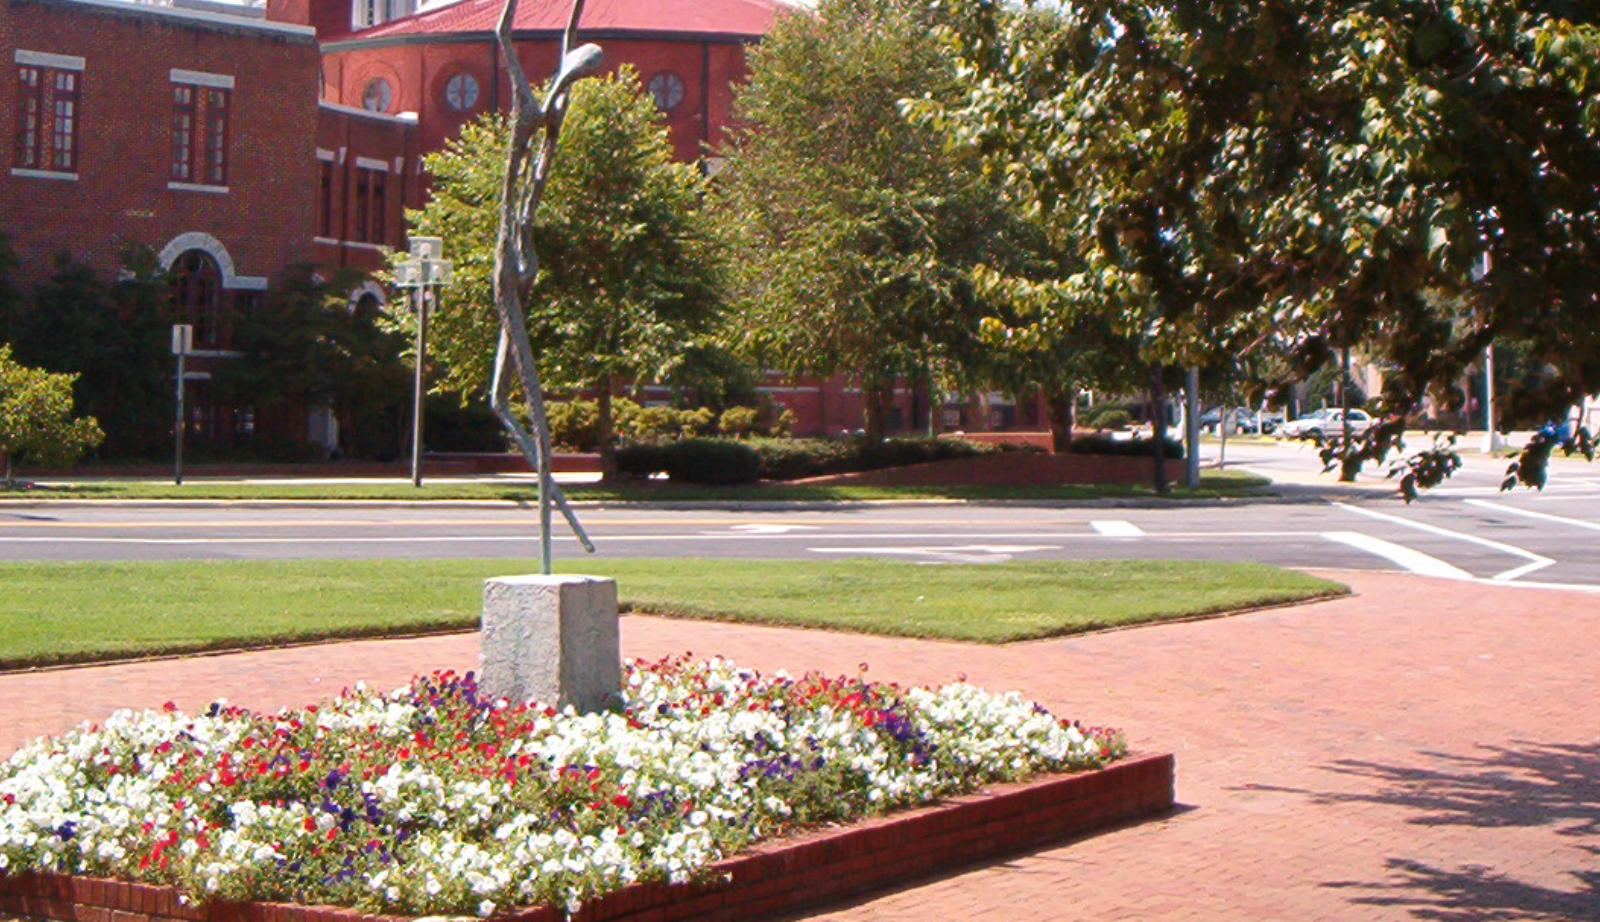 GGSM serves the medical community in Greensboro, NC